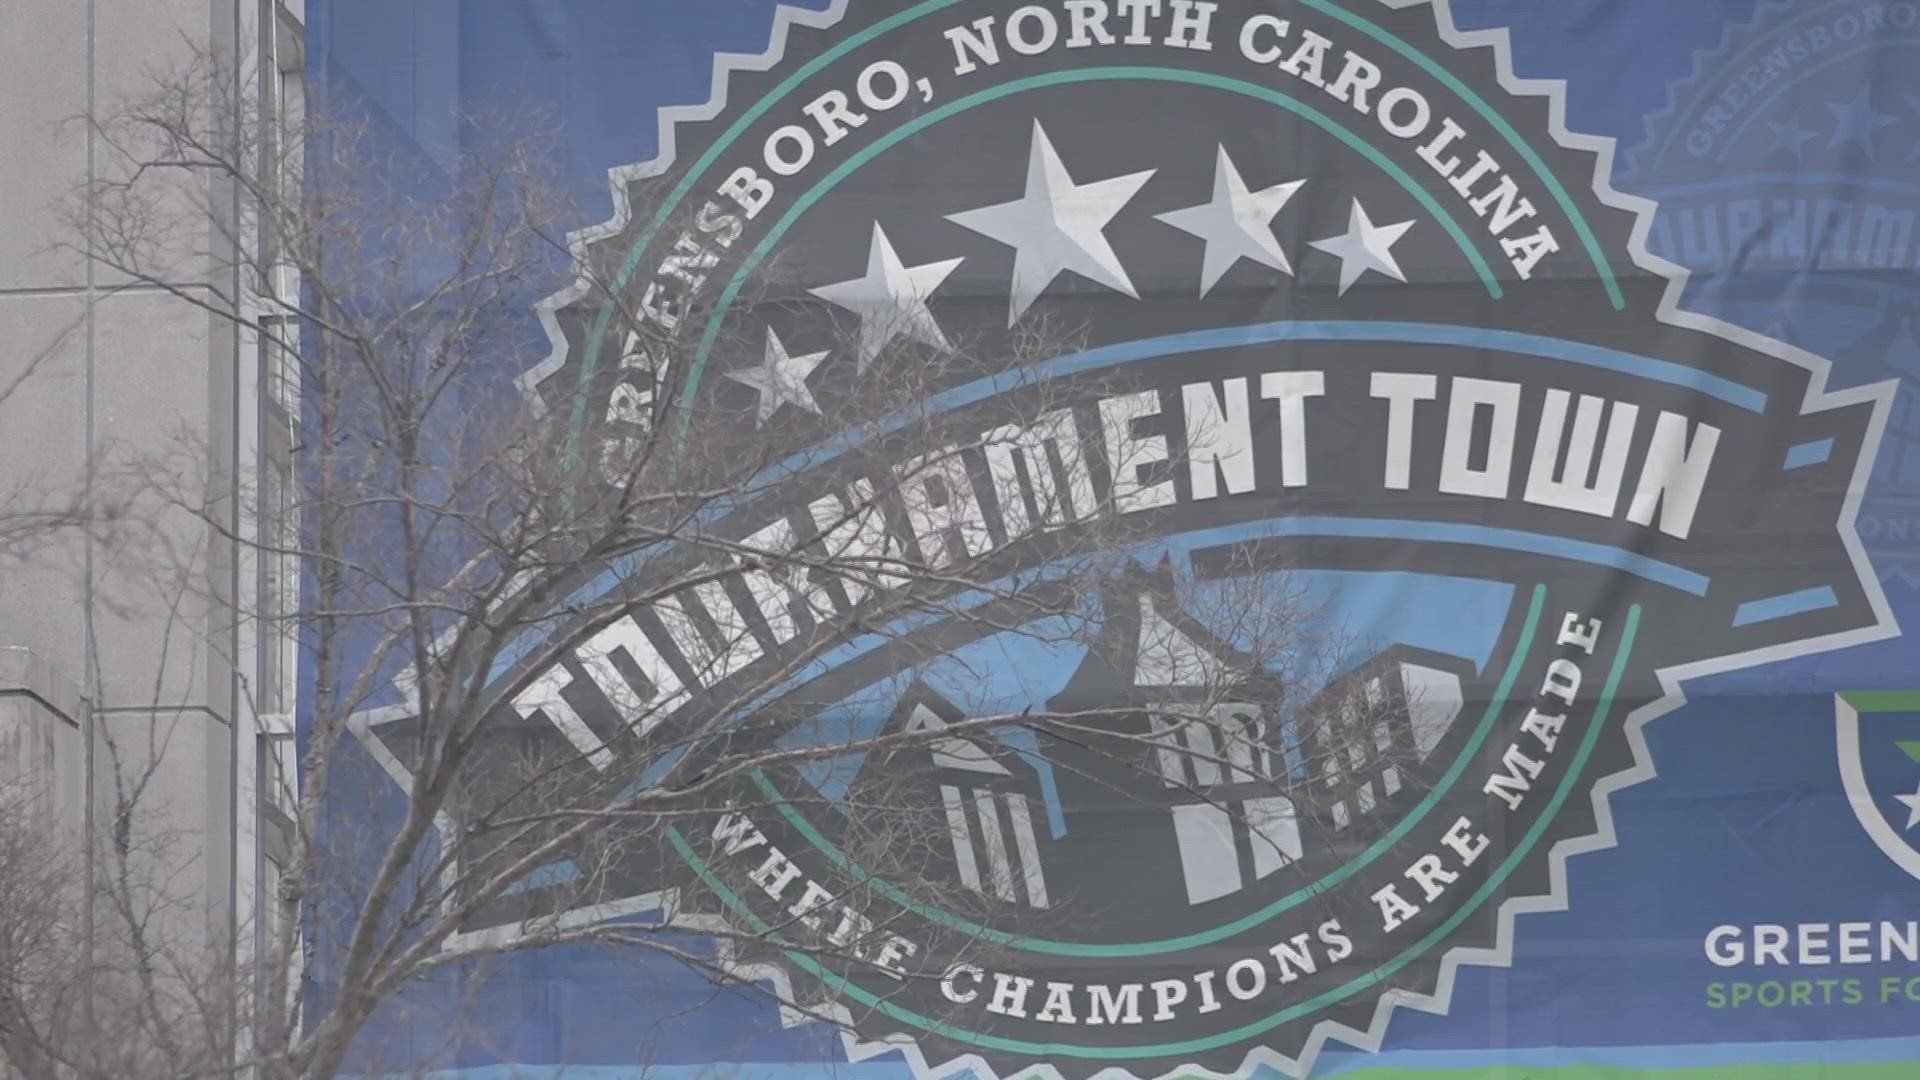 The ACC women's and men's basketball tournaments, as well as rounds one and two of the NCAA men's tournament, are being held at the Greensboro Coliseum.